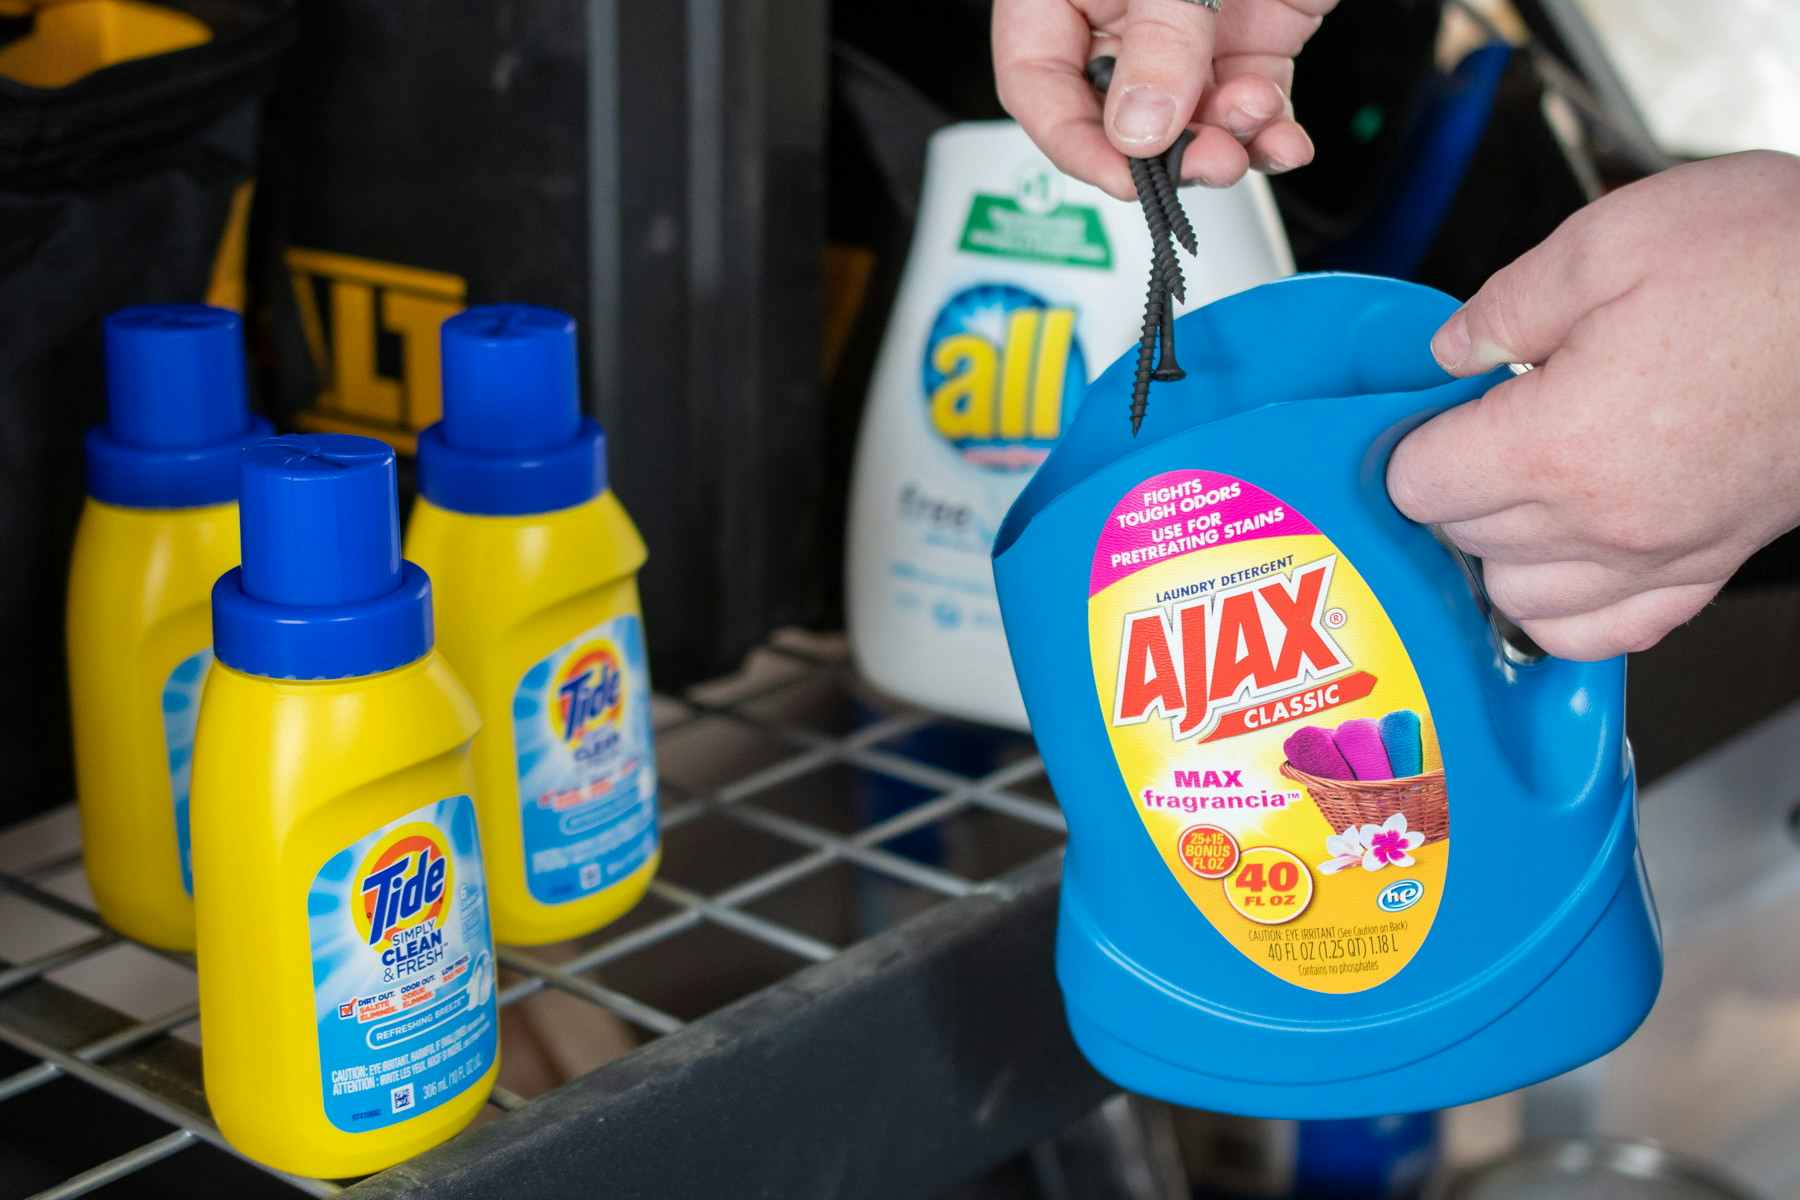 Reuse a laundry detergent bottle for tool shed storage.